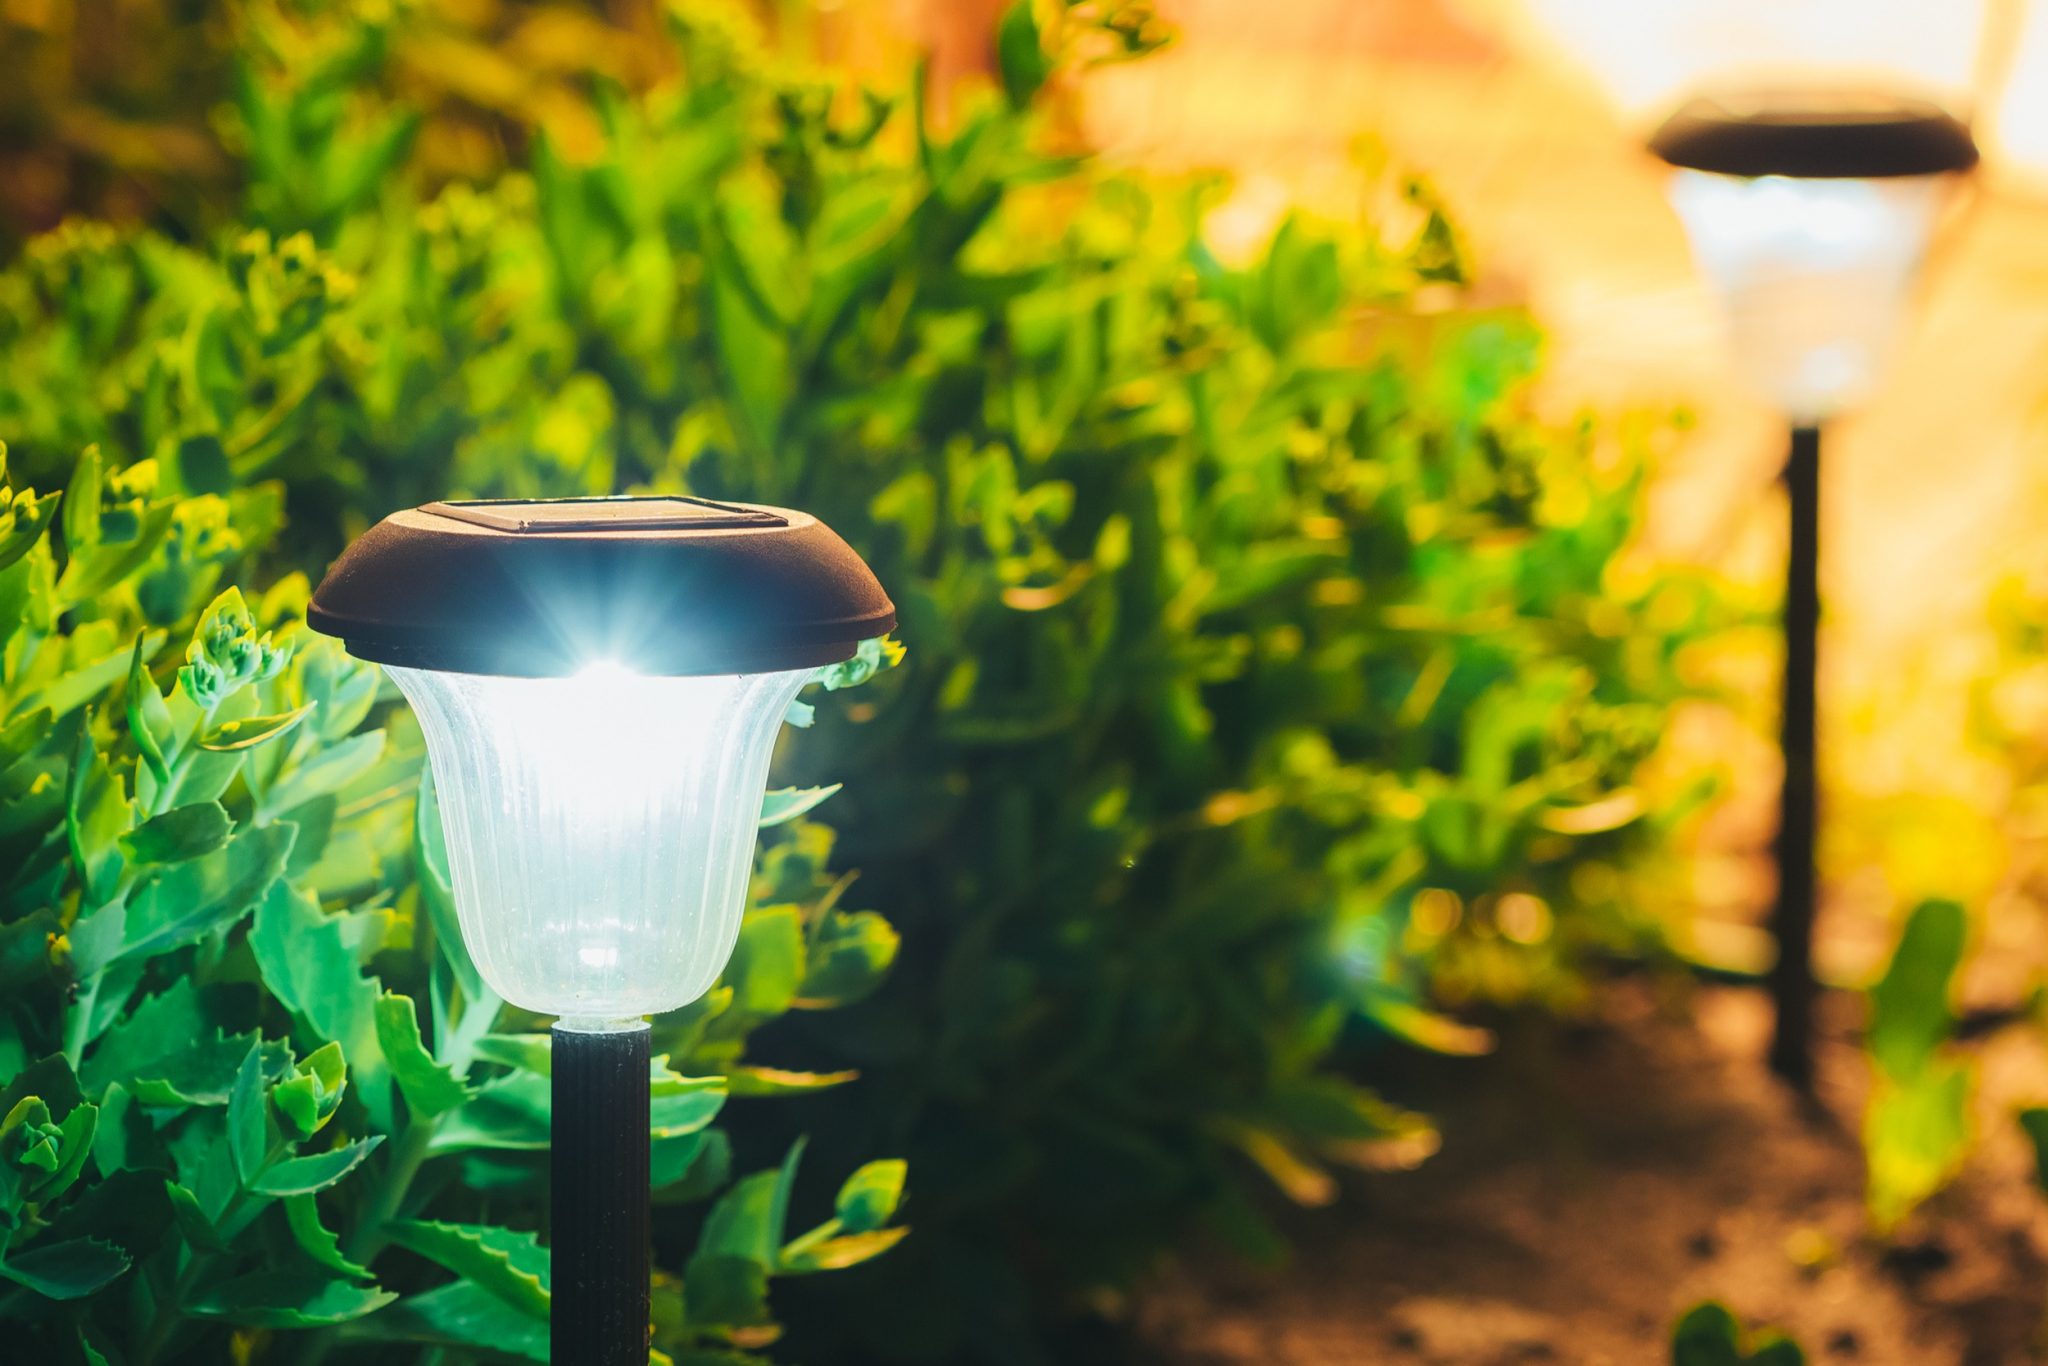 Solar Landscape Lighting Pros And Cons, Top Rated Solar Led Landscape Lighting